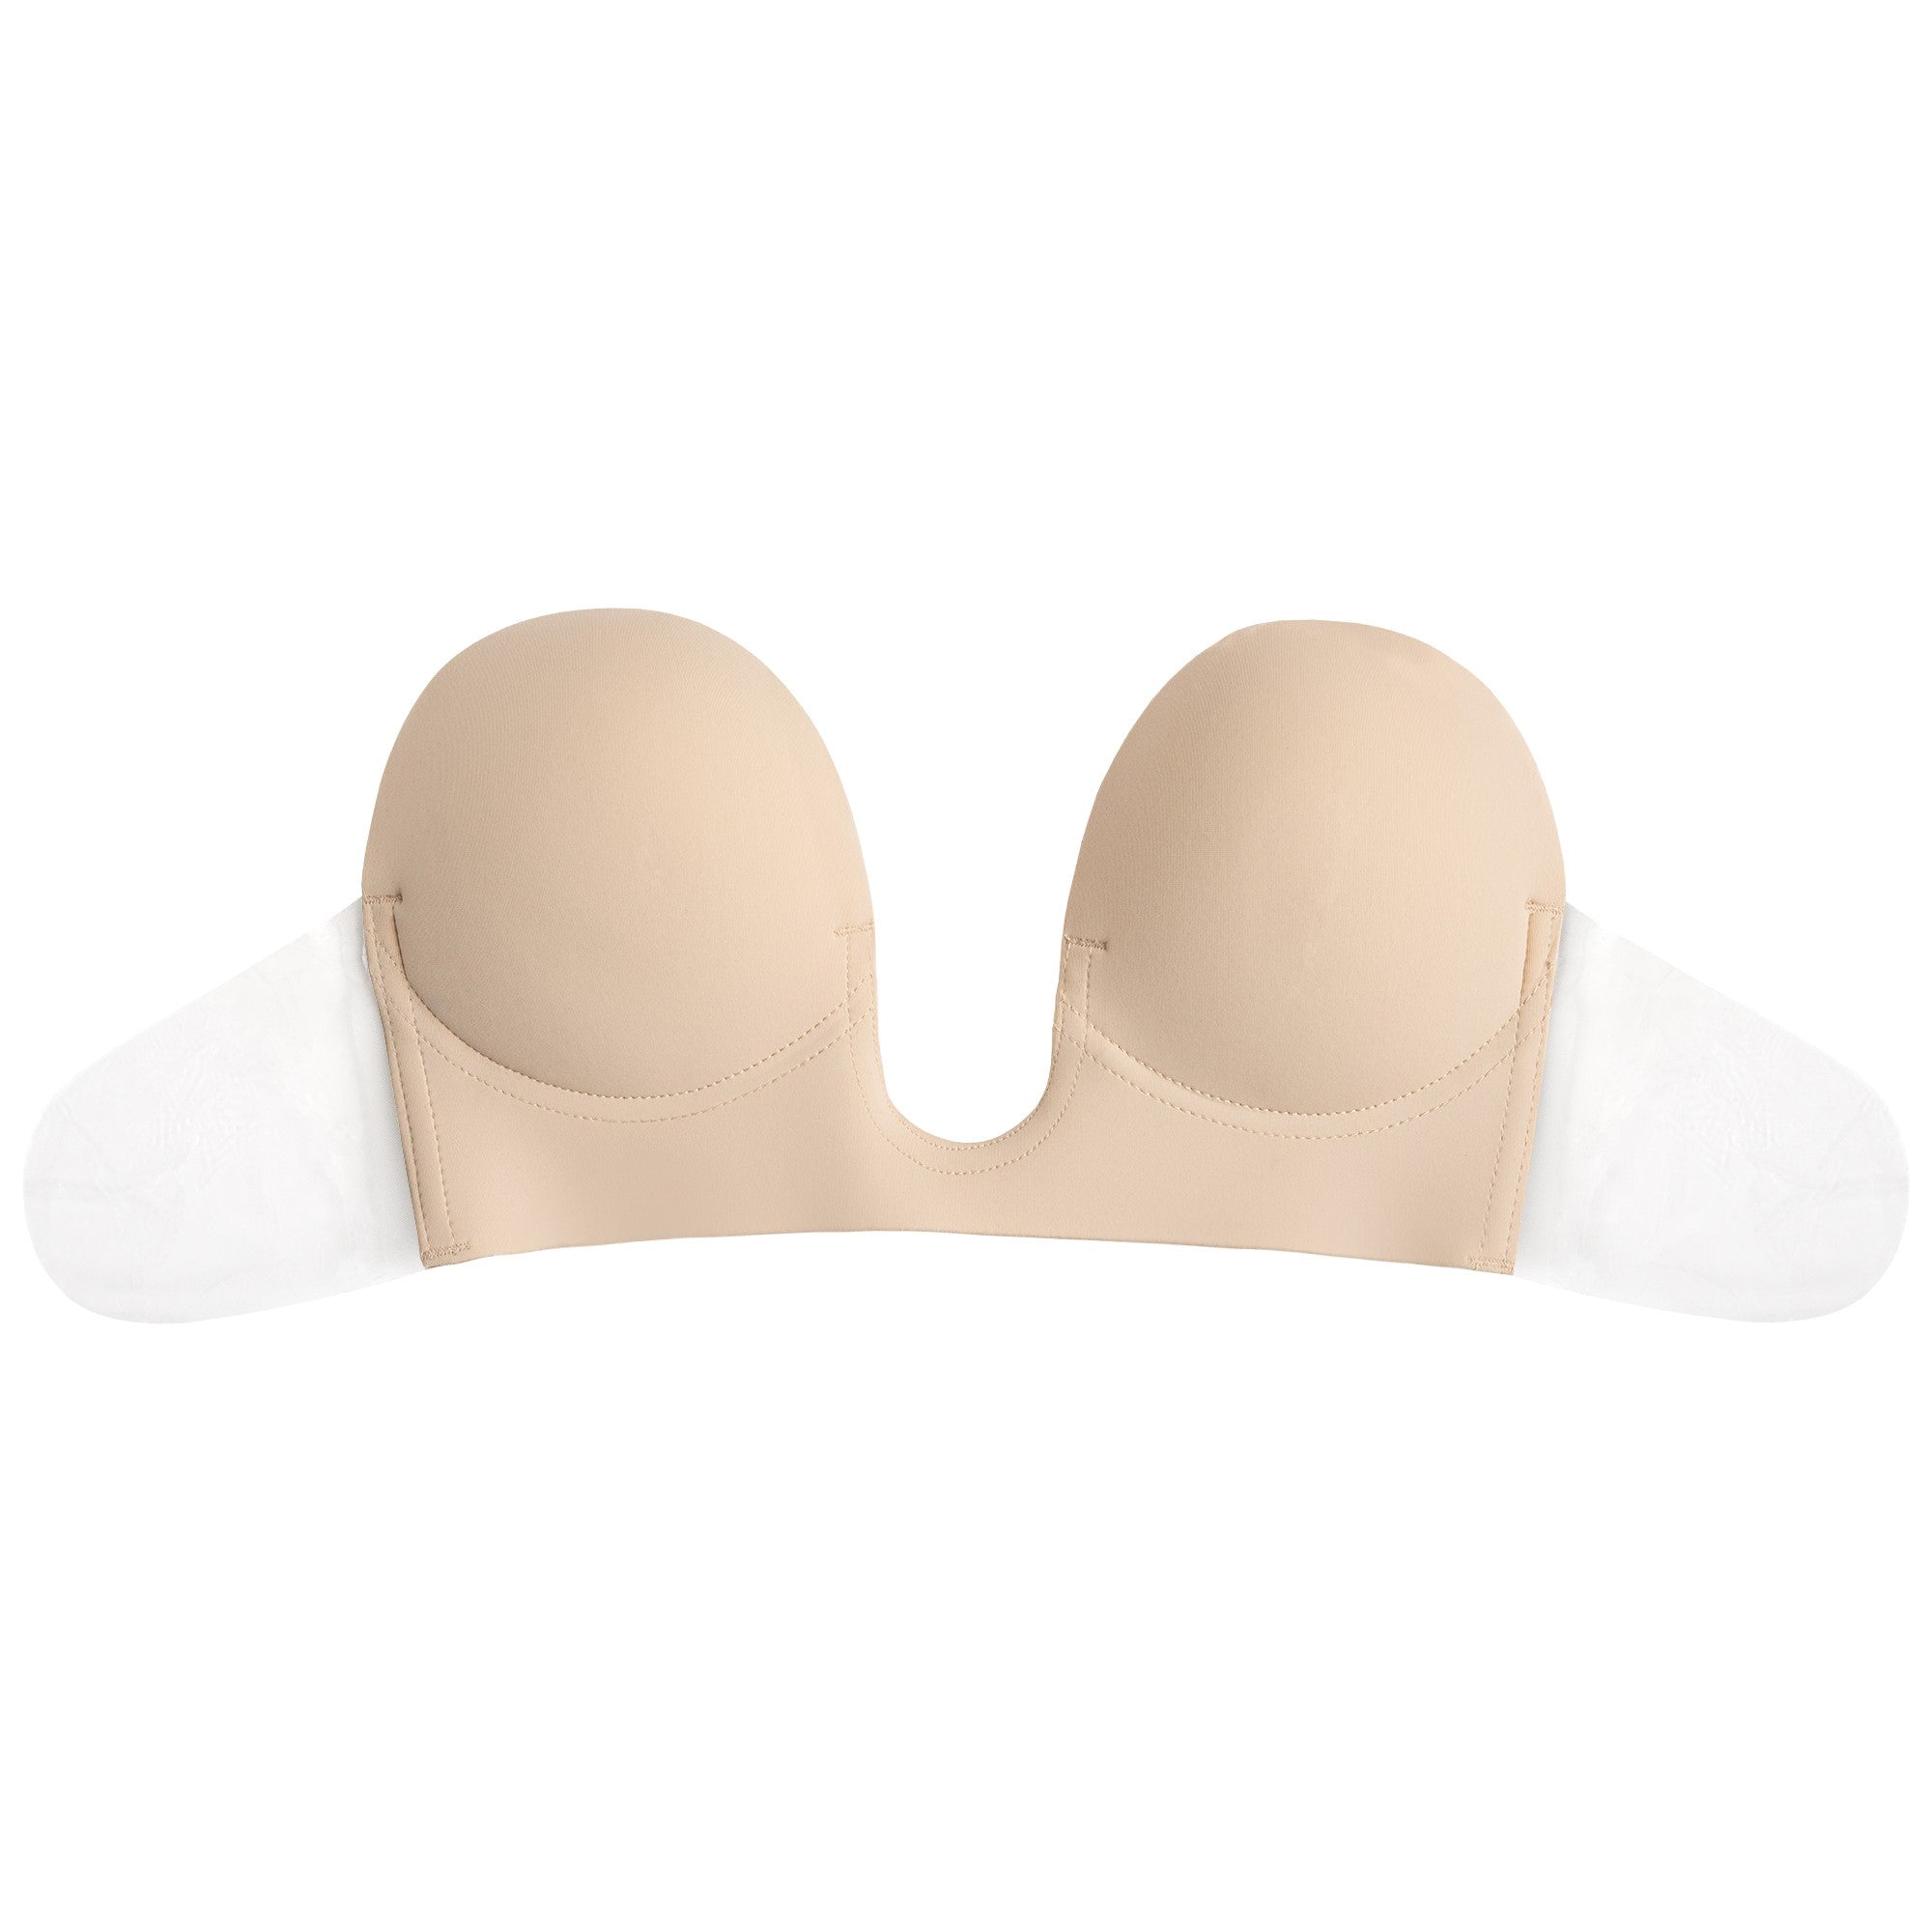 Invisible Push Up Bra Pasty Chest Lift Tape for Bikini Bust Lifter Tapes❤